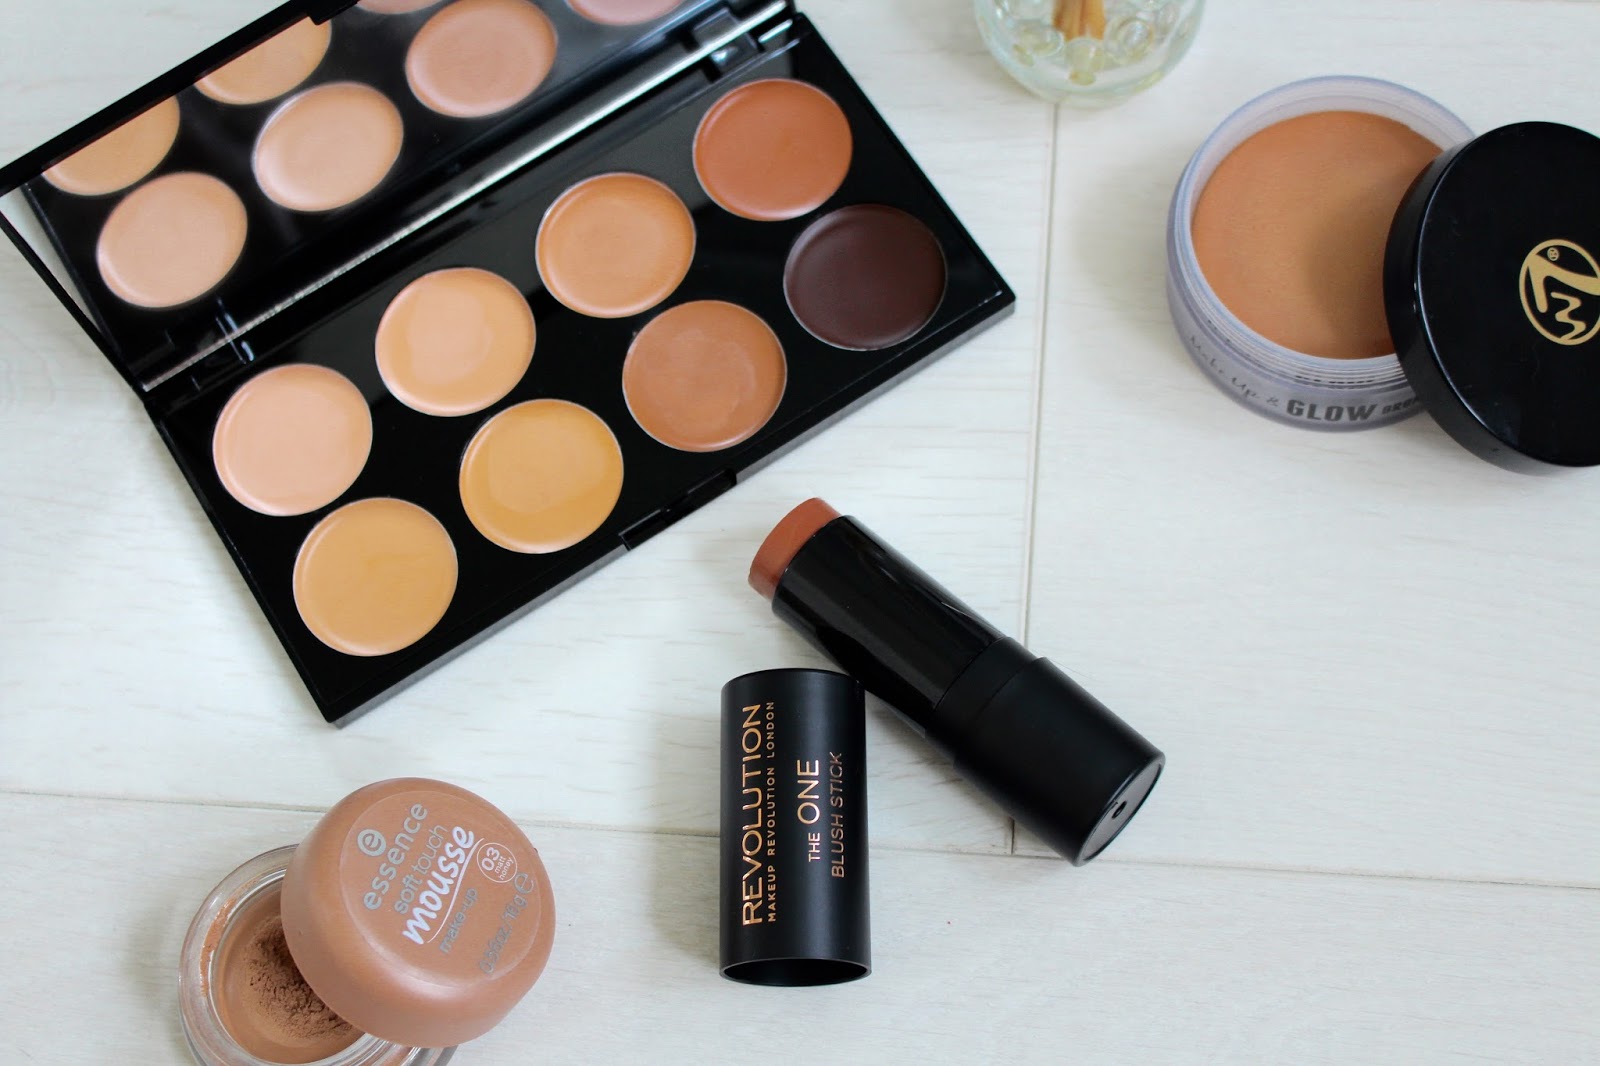 Cream contouring on a budget feat. Makeup Revolution, Essence and W7.